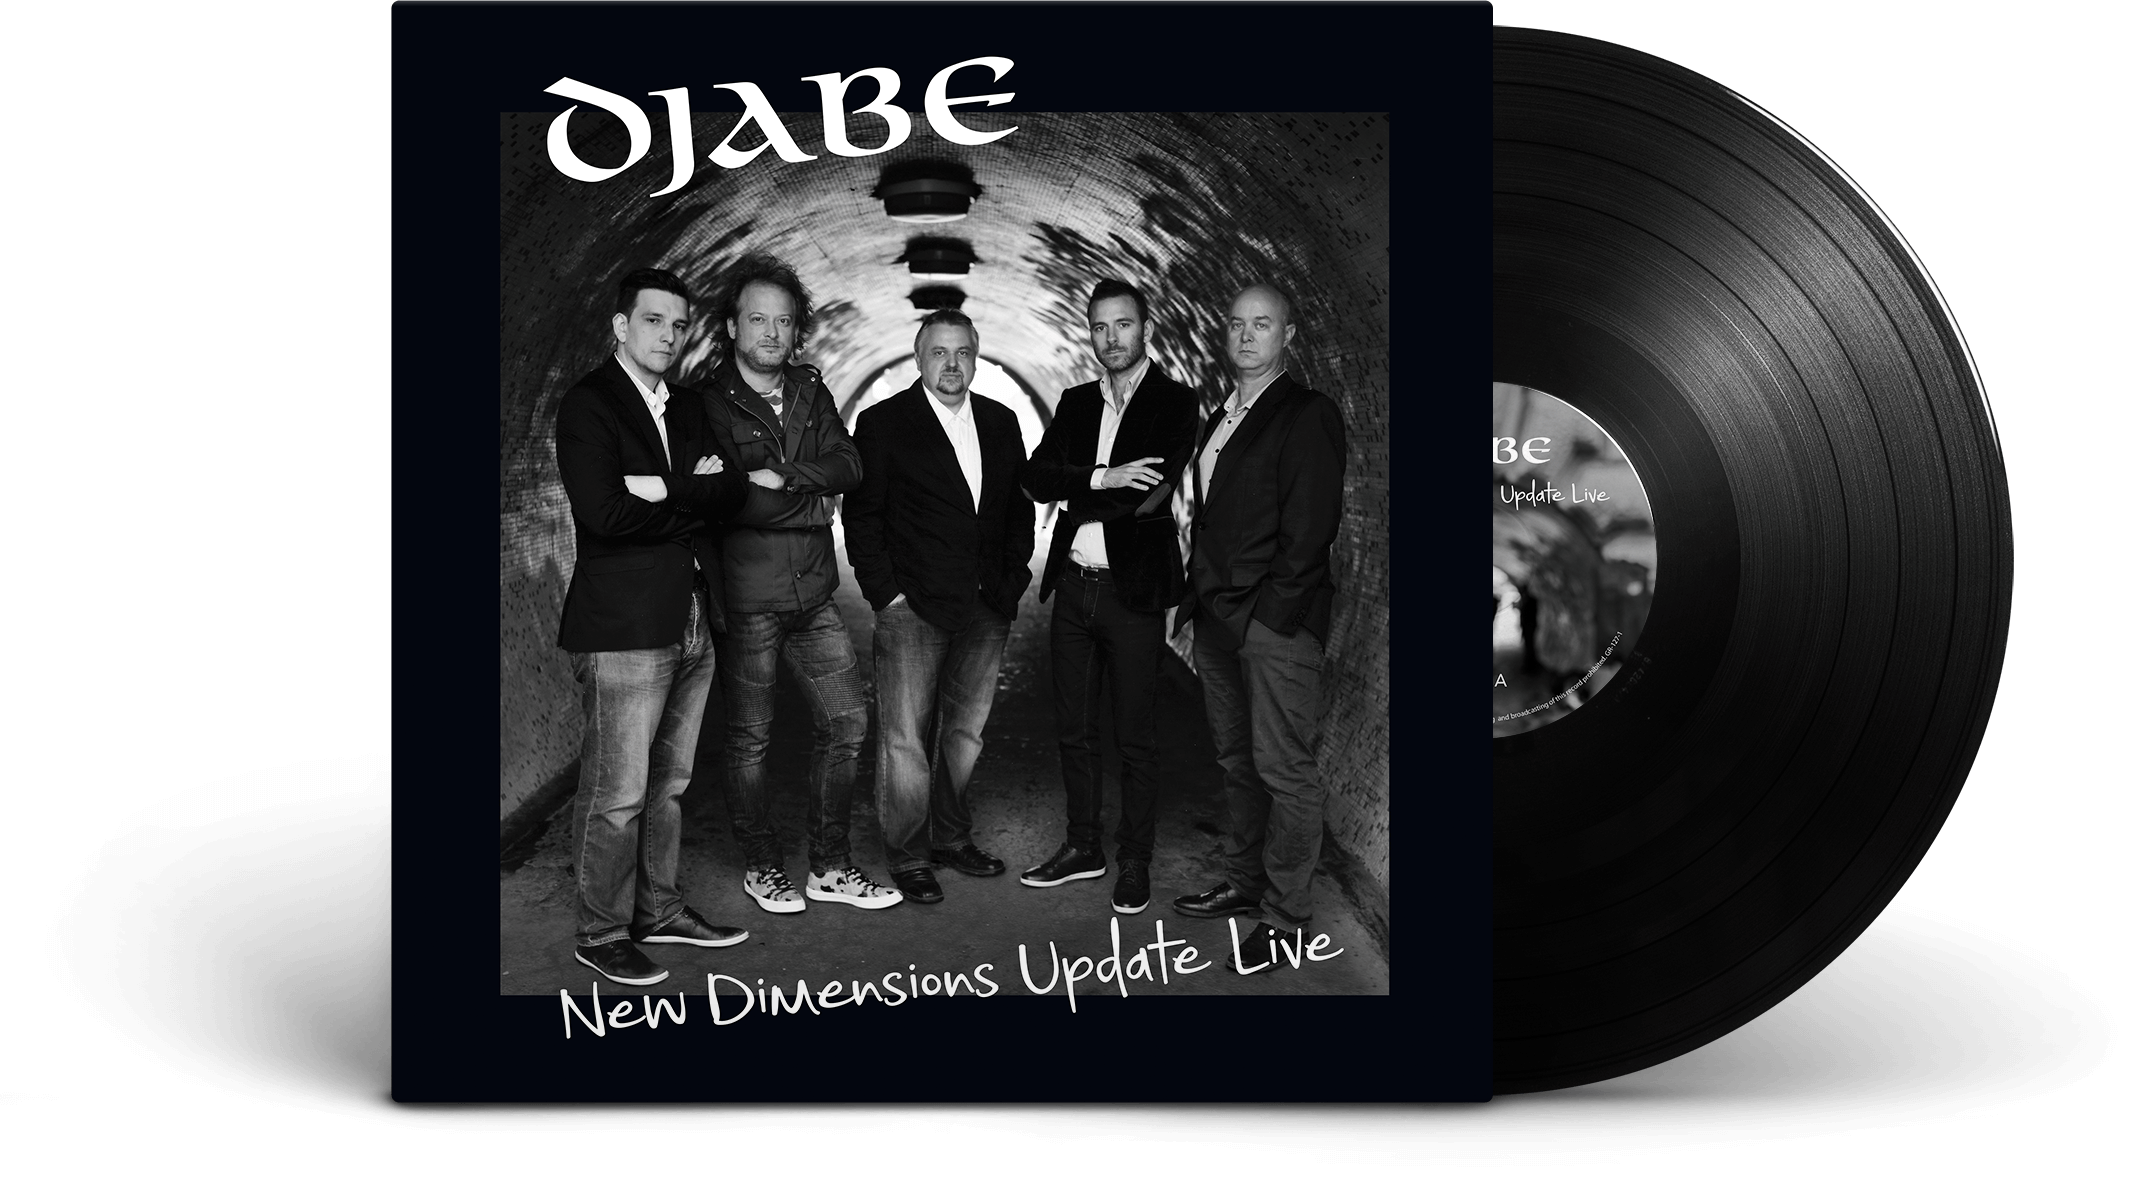 Djabe – New Dimensions Update Live (LP)